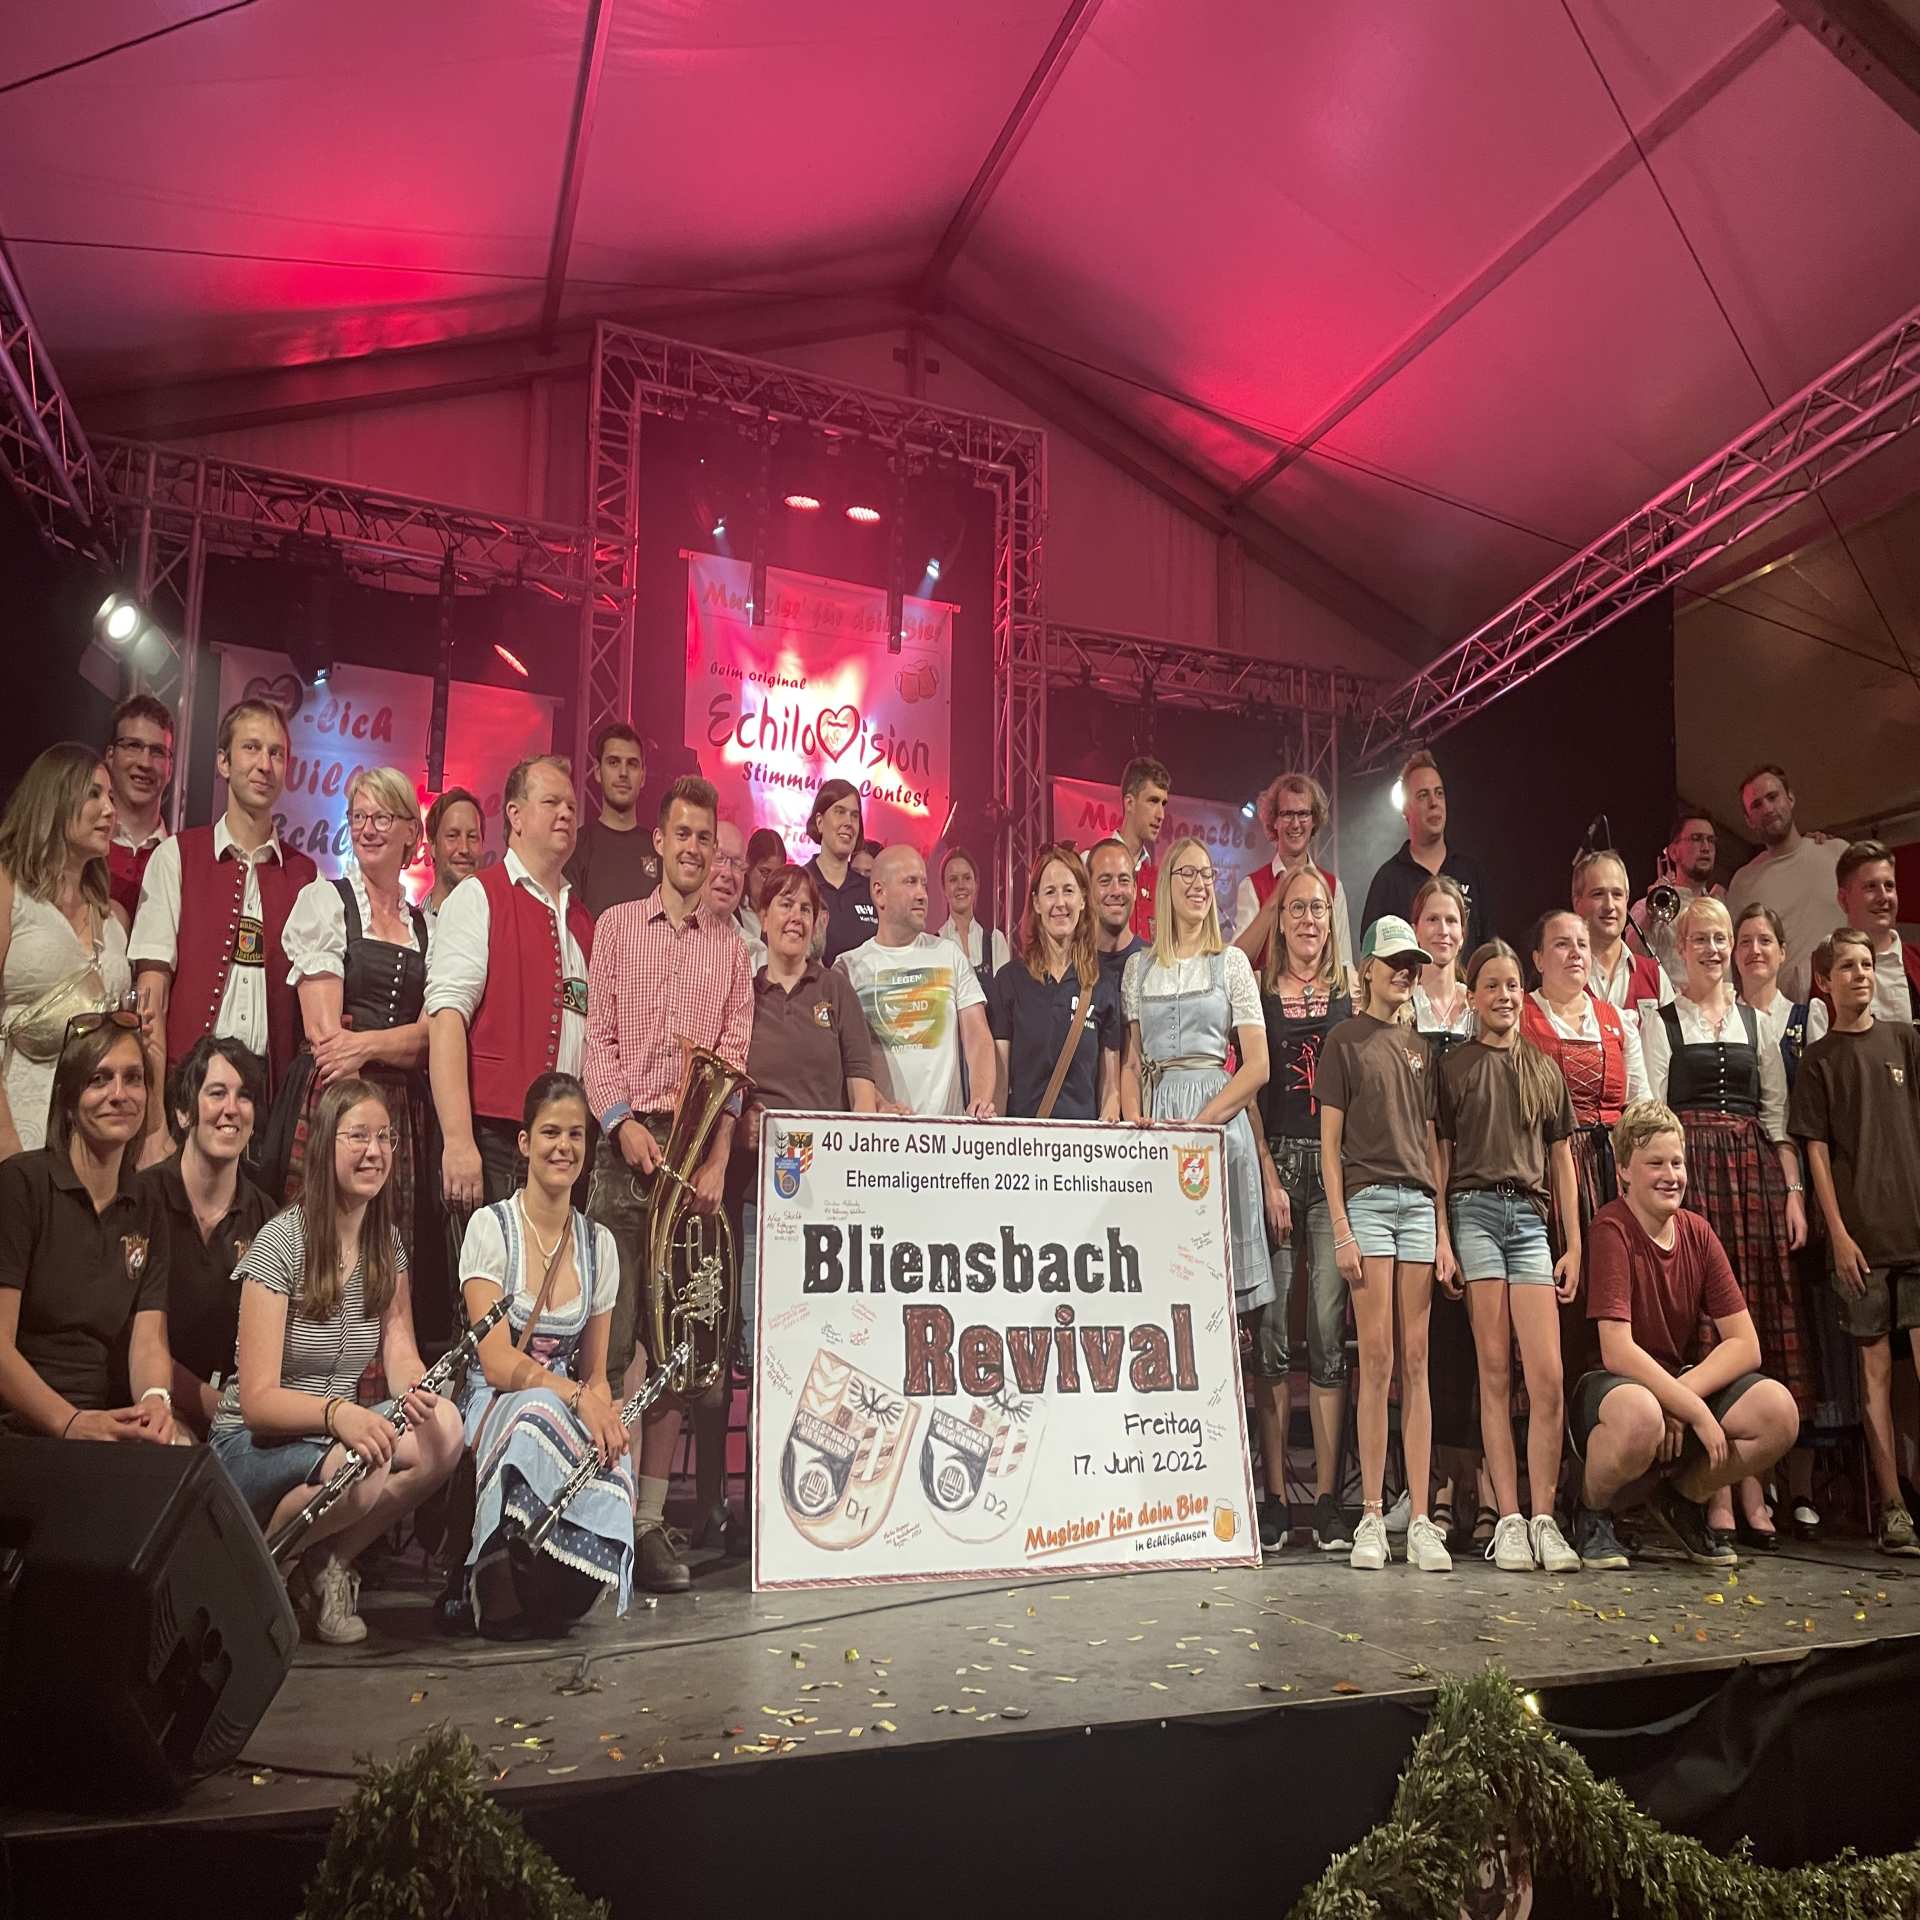 Bliensbach Revival